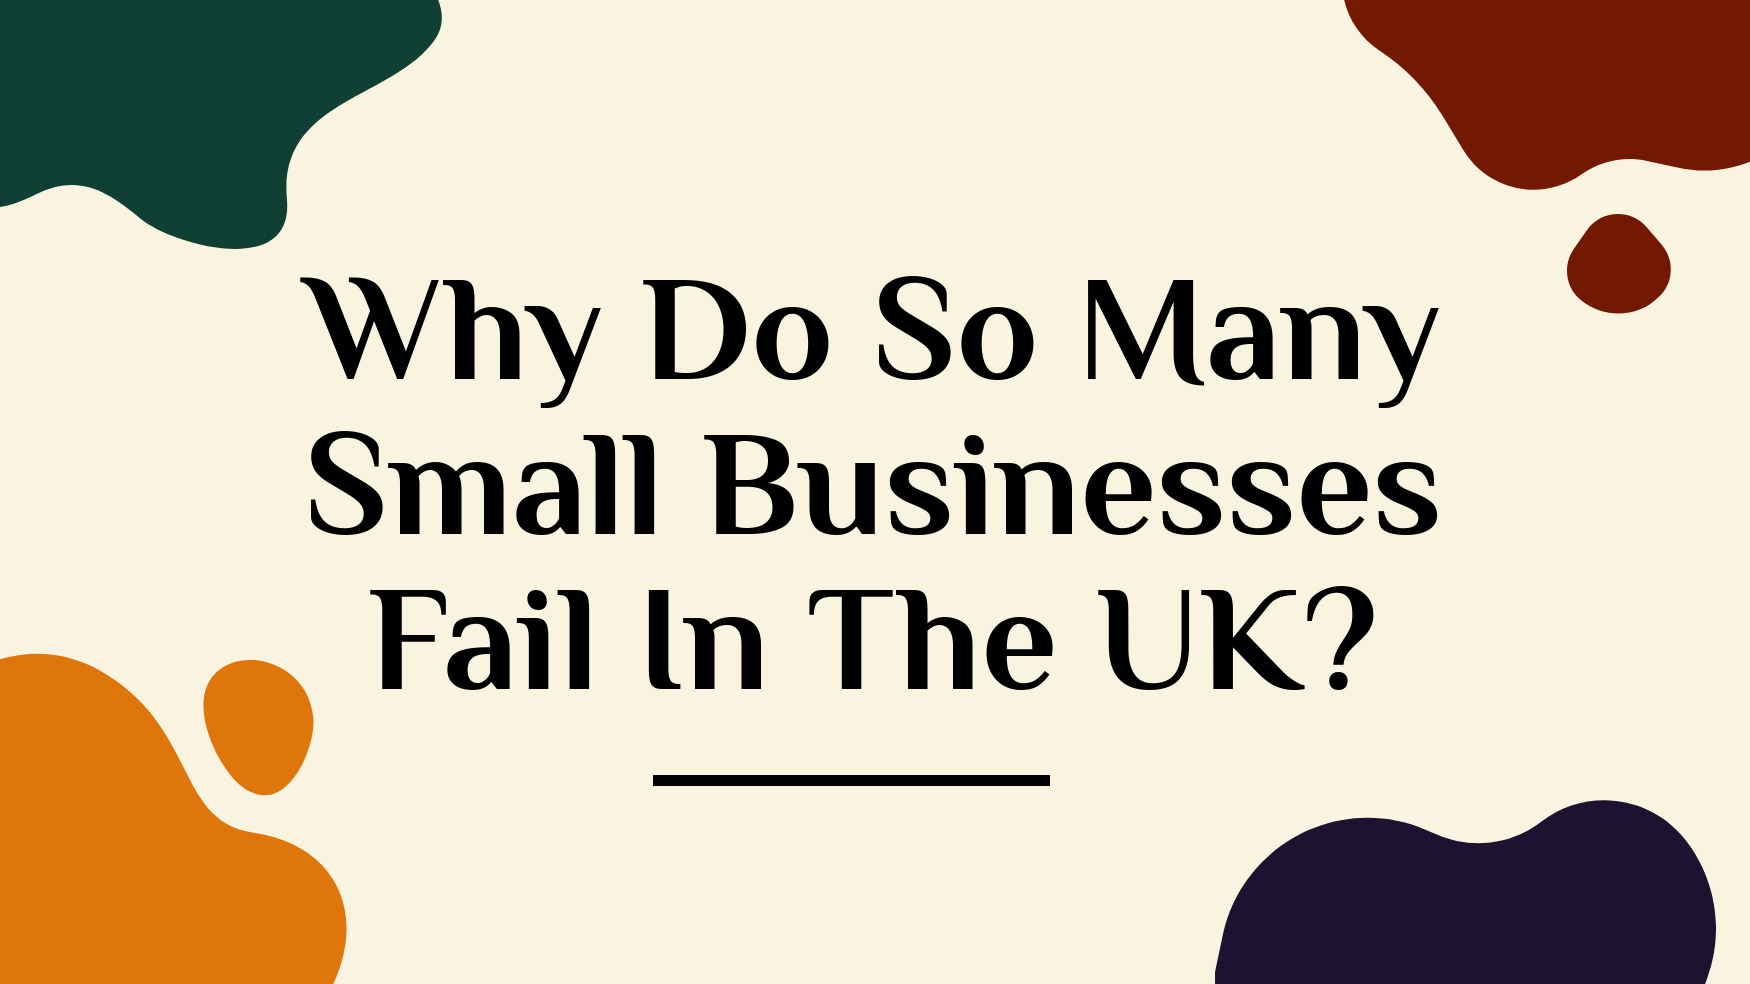 Why Do So Many Small Businesses Fail In The UK?